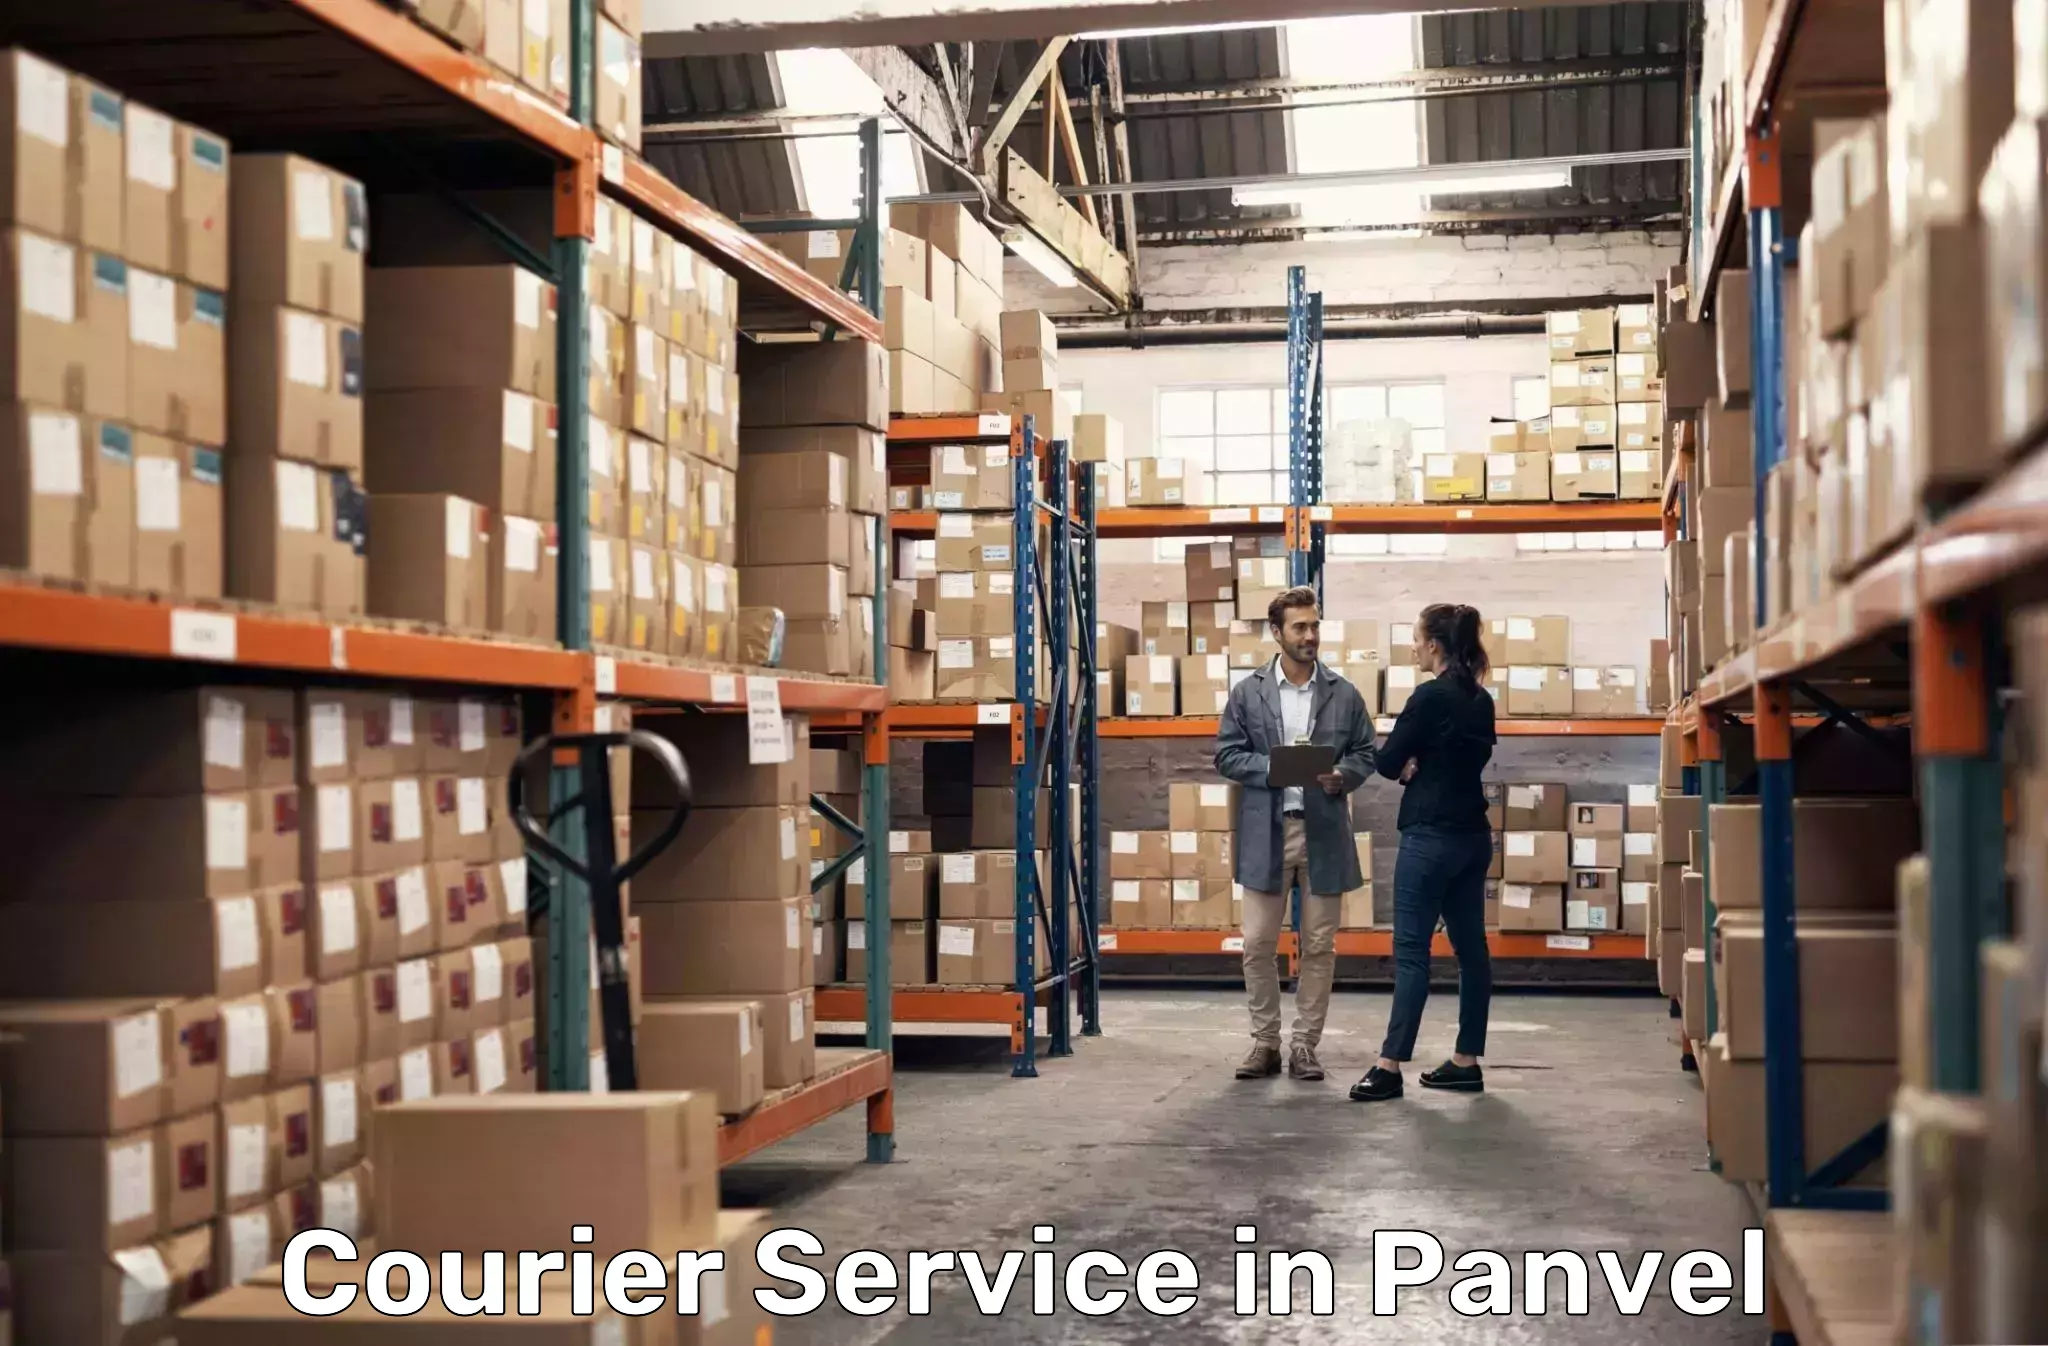 Same-day delivery options in Panvel